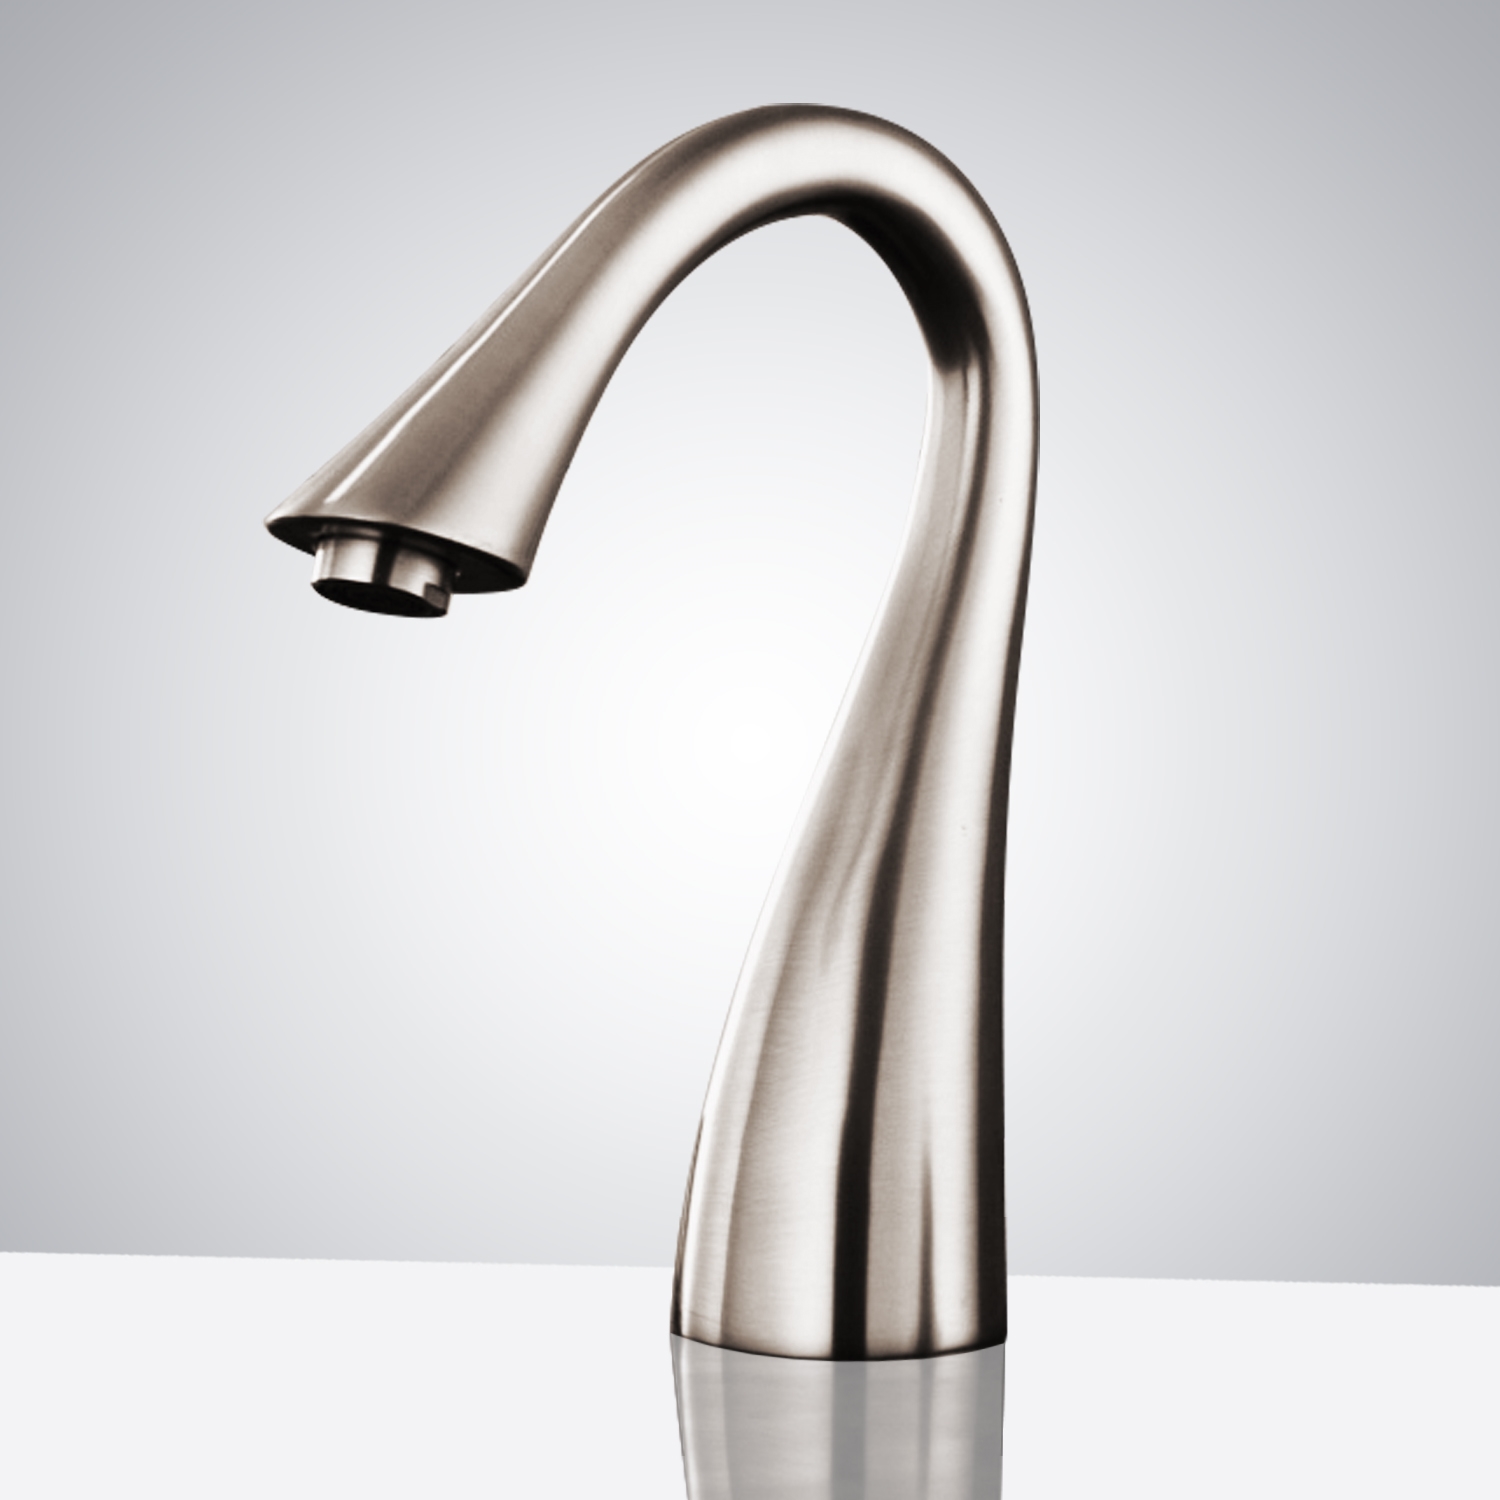 Fontana Commercial Brushed Nickel Touchless Automatic Sensor Hands Free Faucet